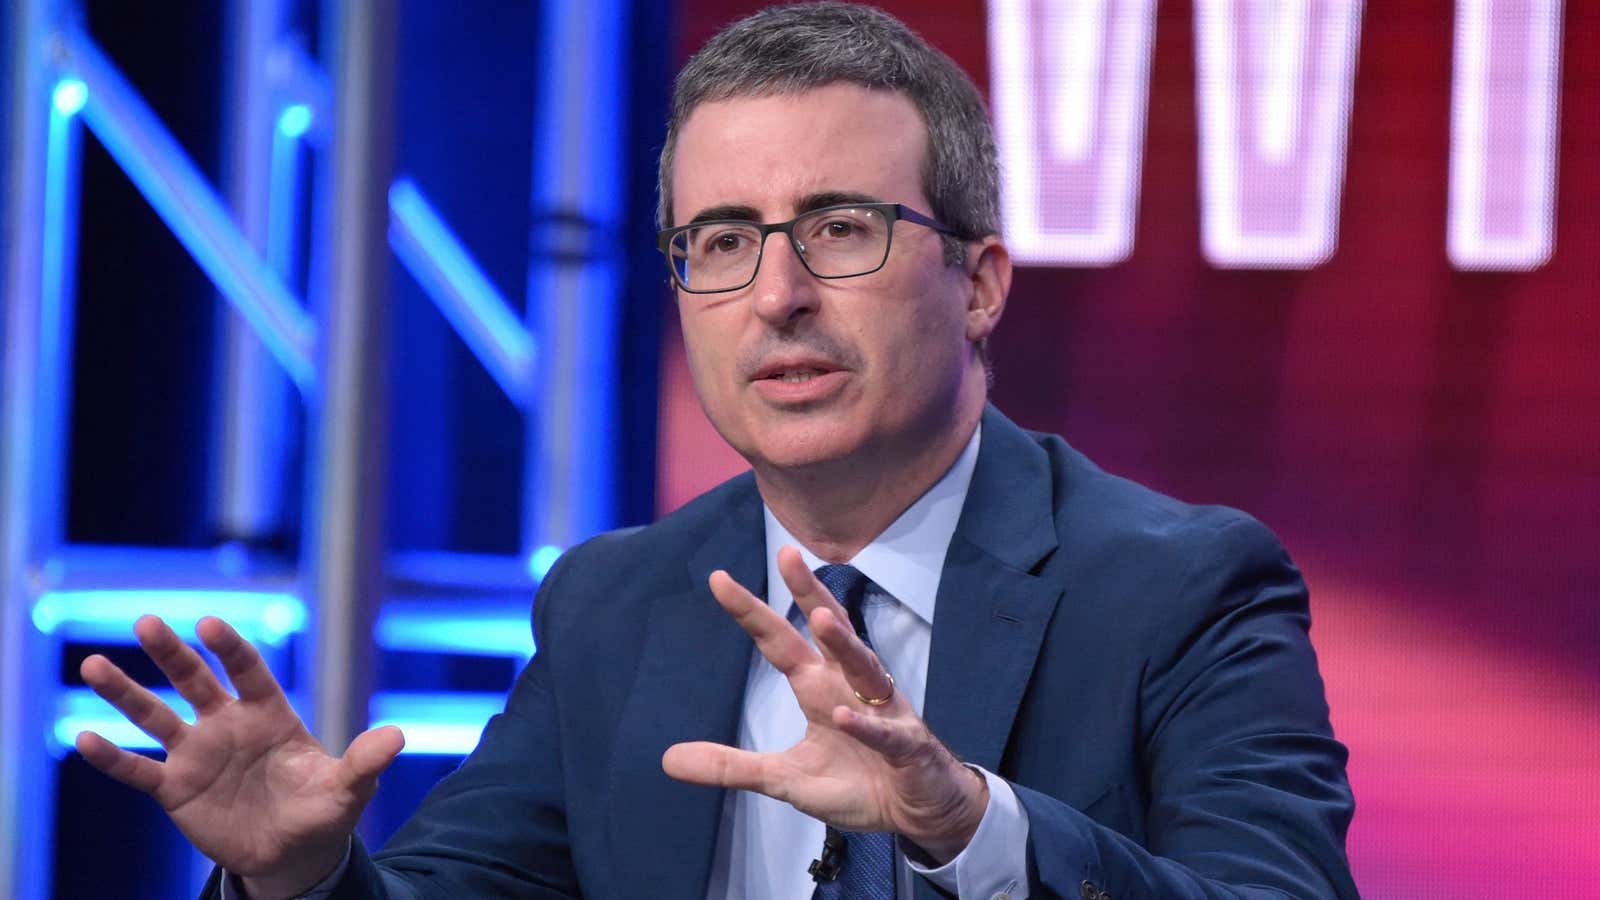 The host of “Last Week Tonight” has a handy checklist for you.